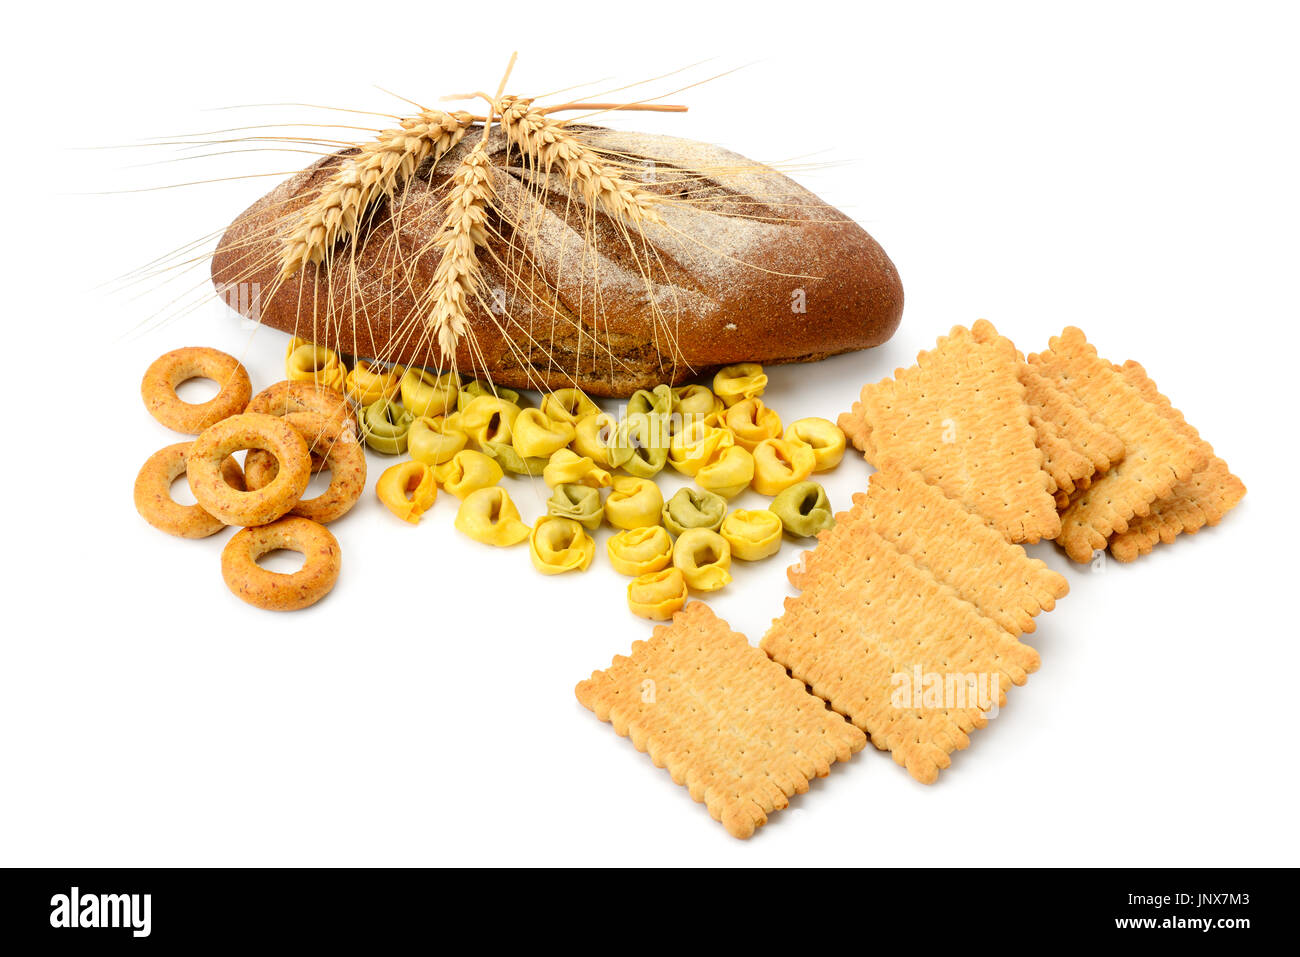 wheat products isolated on white background. Cookies, ravioli, bagels, bread, wheat ears. Healthy food. Stock Photo